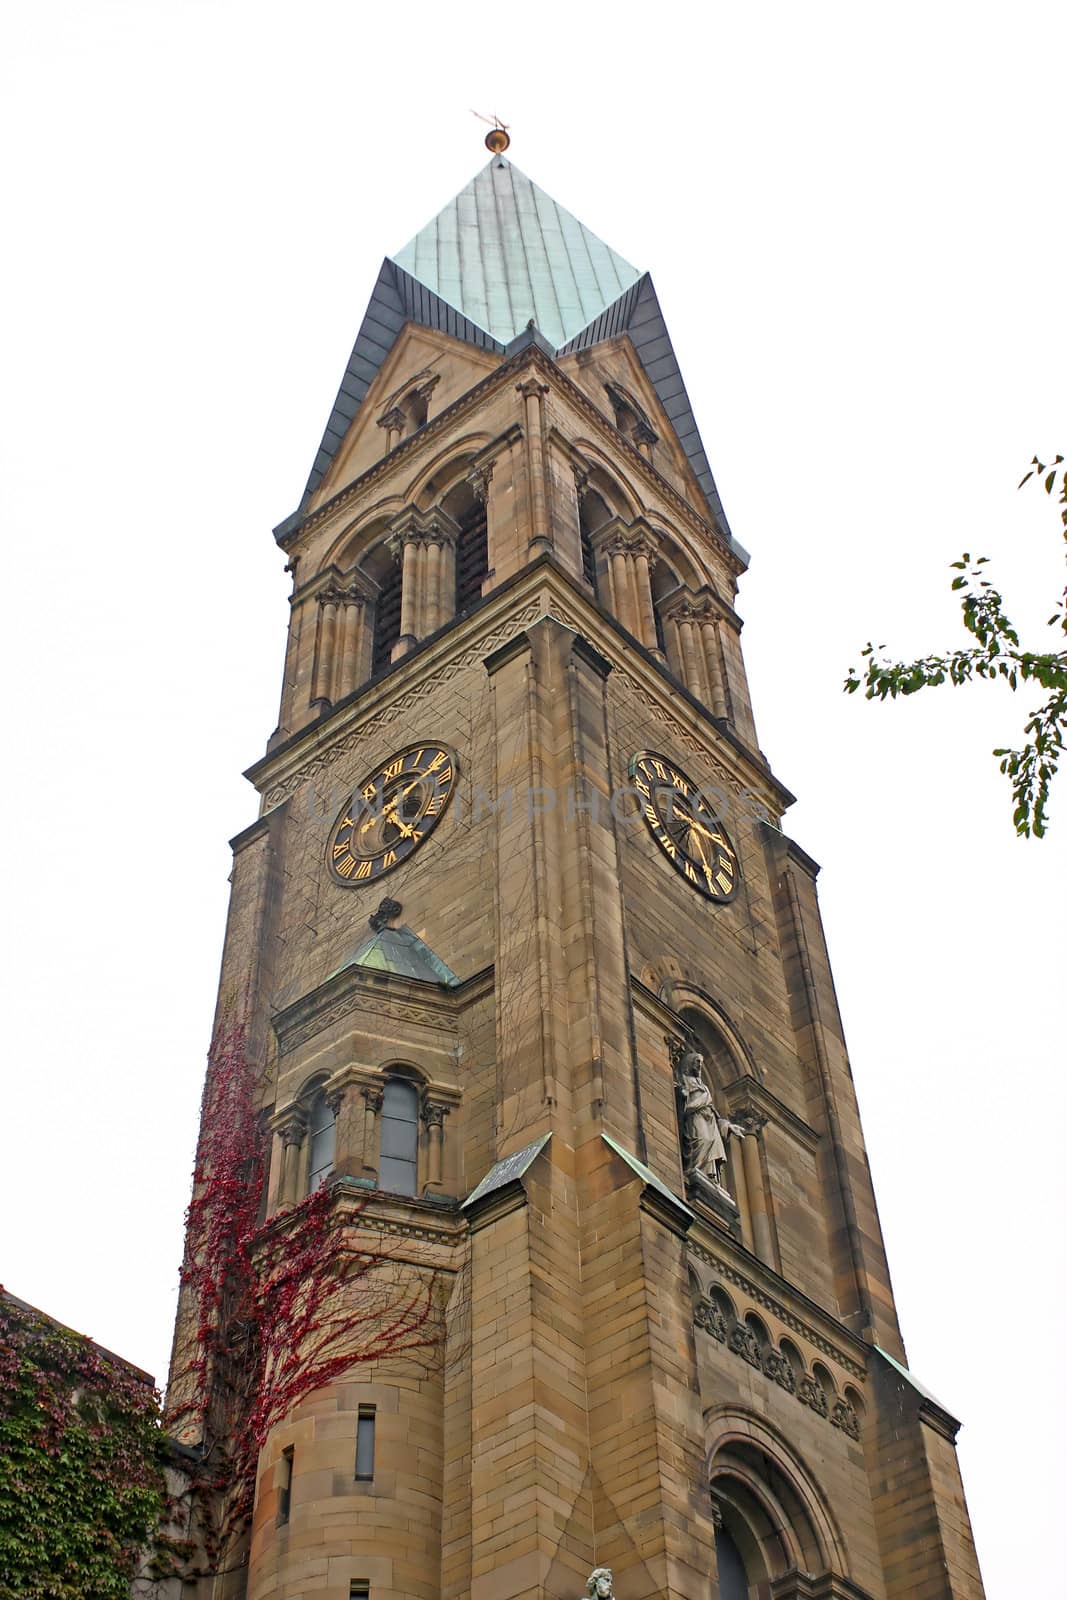 Tower of Evangelical South Parish Church of Peace,Stuttgart, Germany